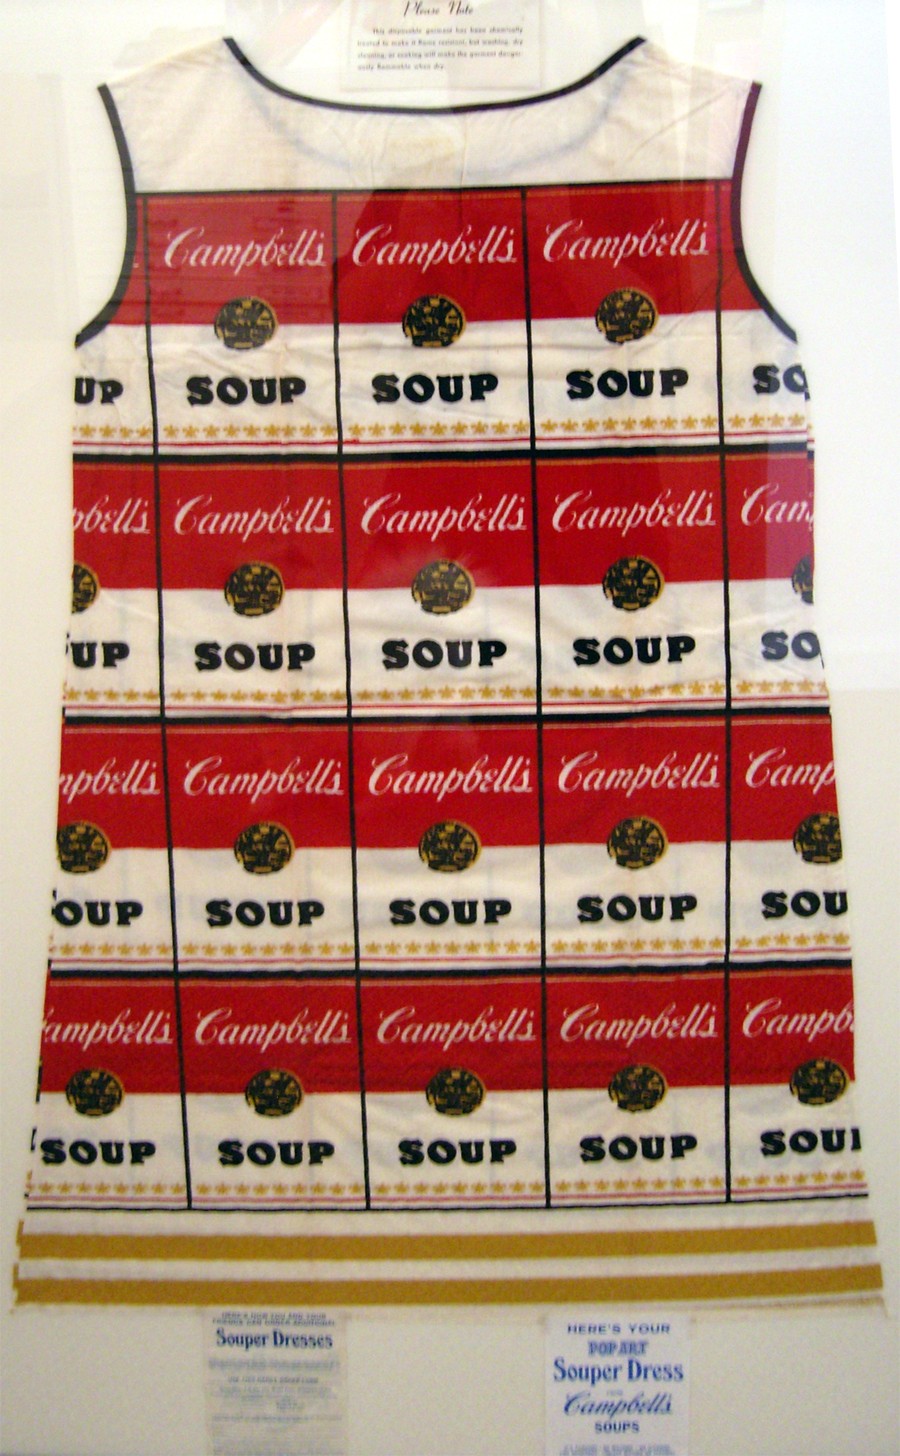 Andy Warhol | The Souper Dress | 1966 | Image of Artists' work.